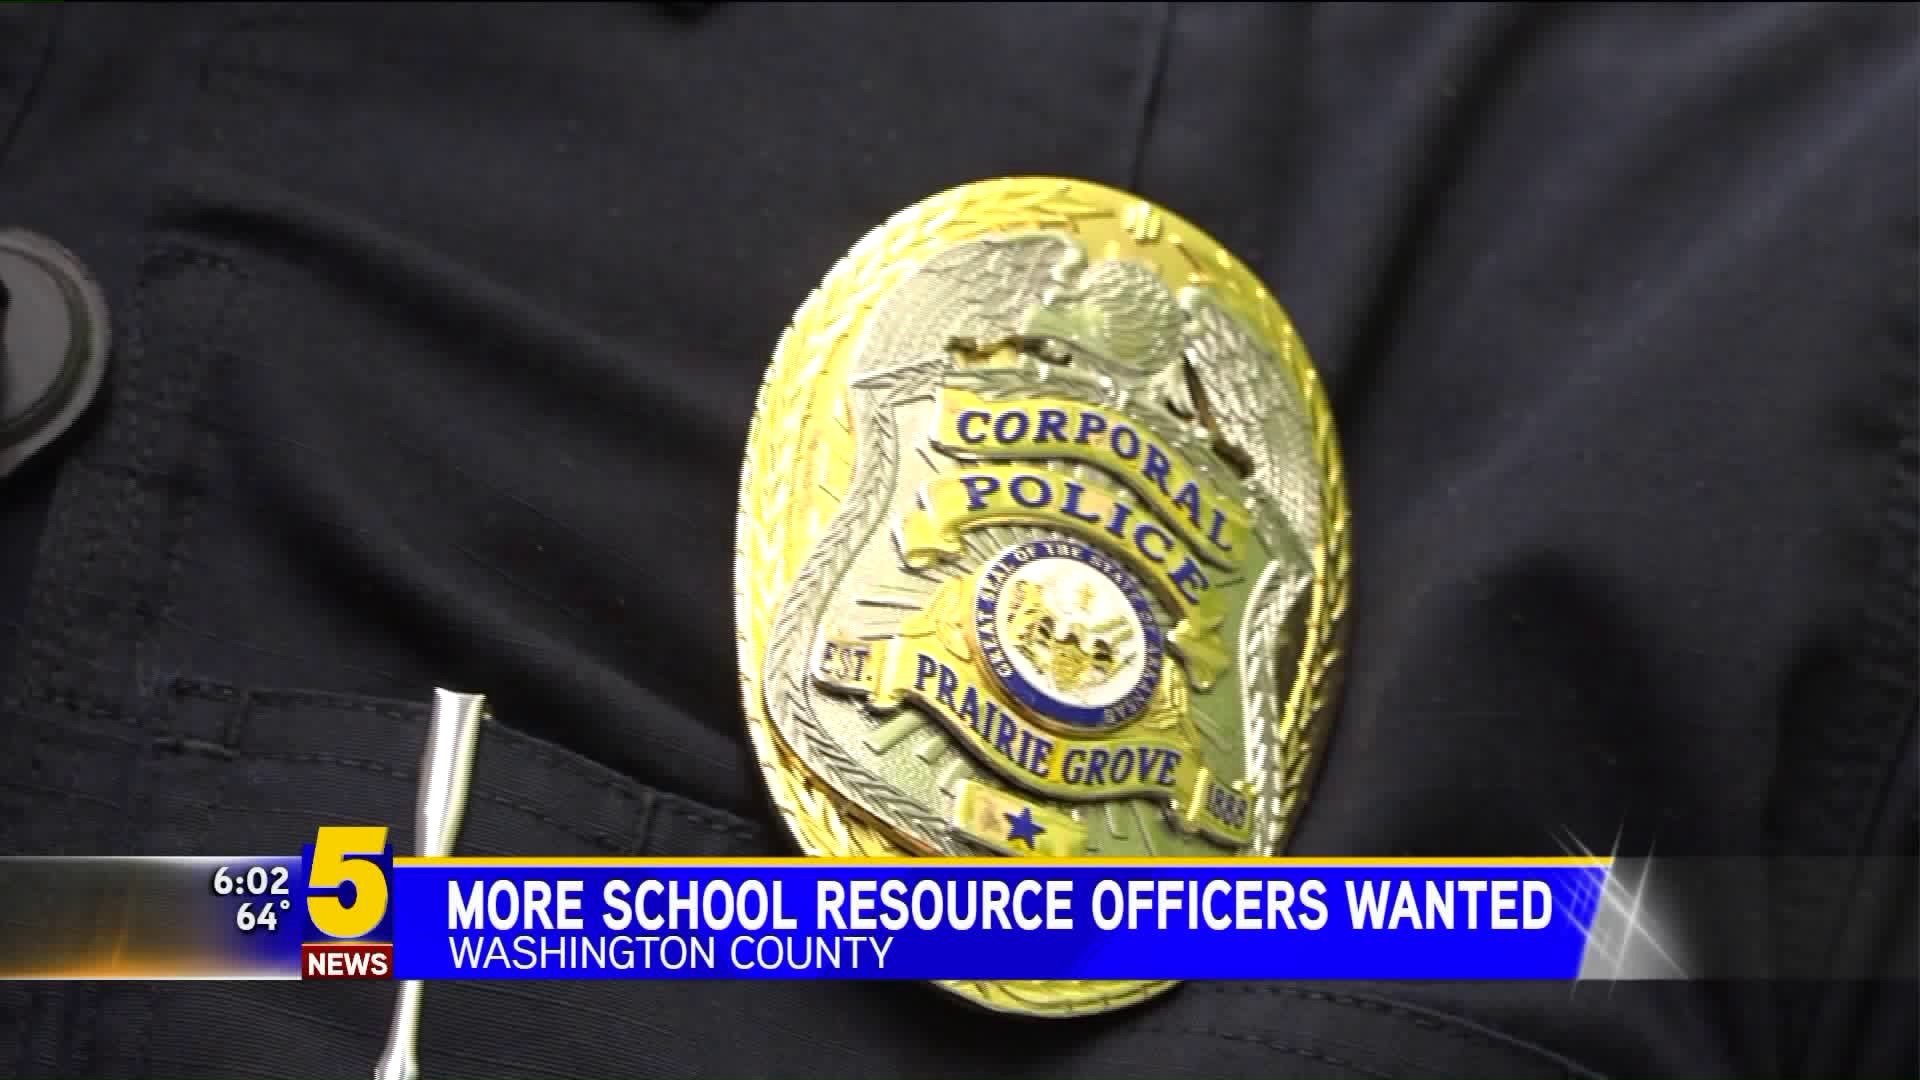 More School Resource Officers Wanted